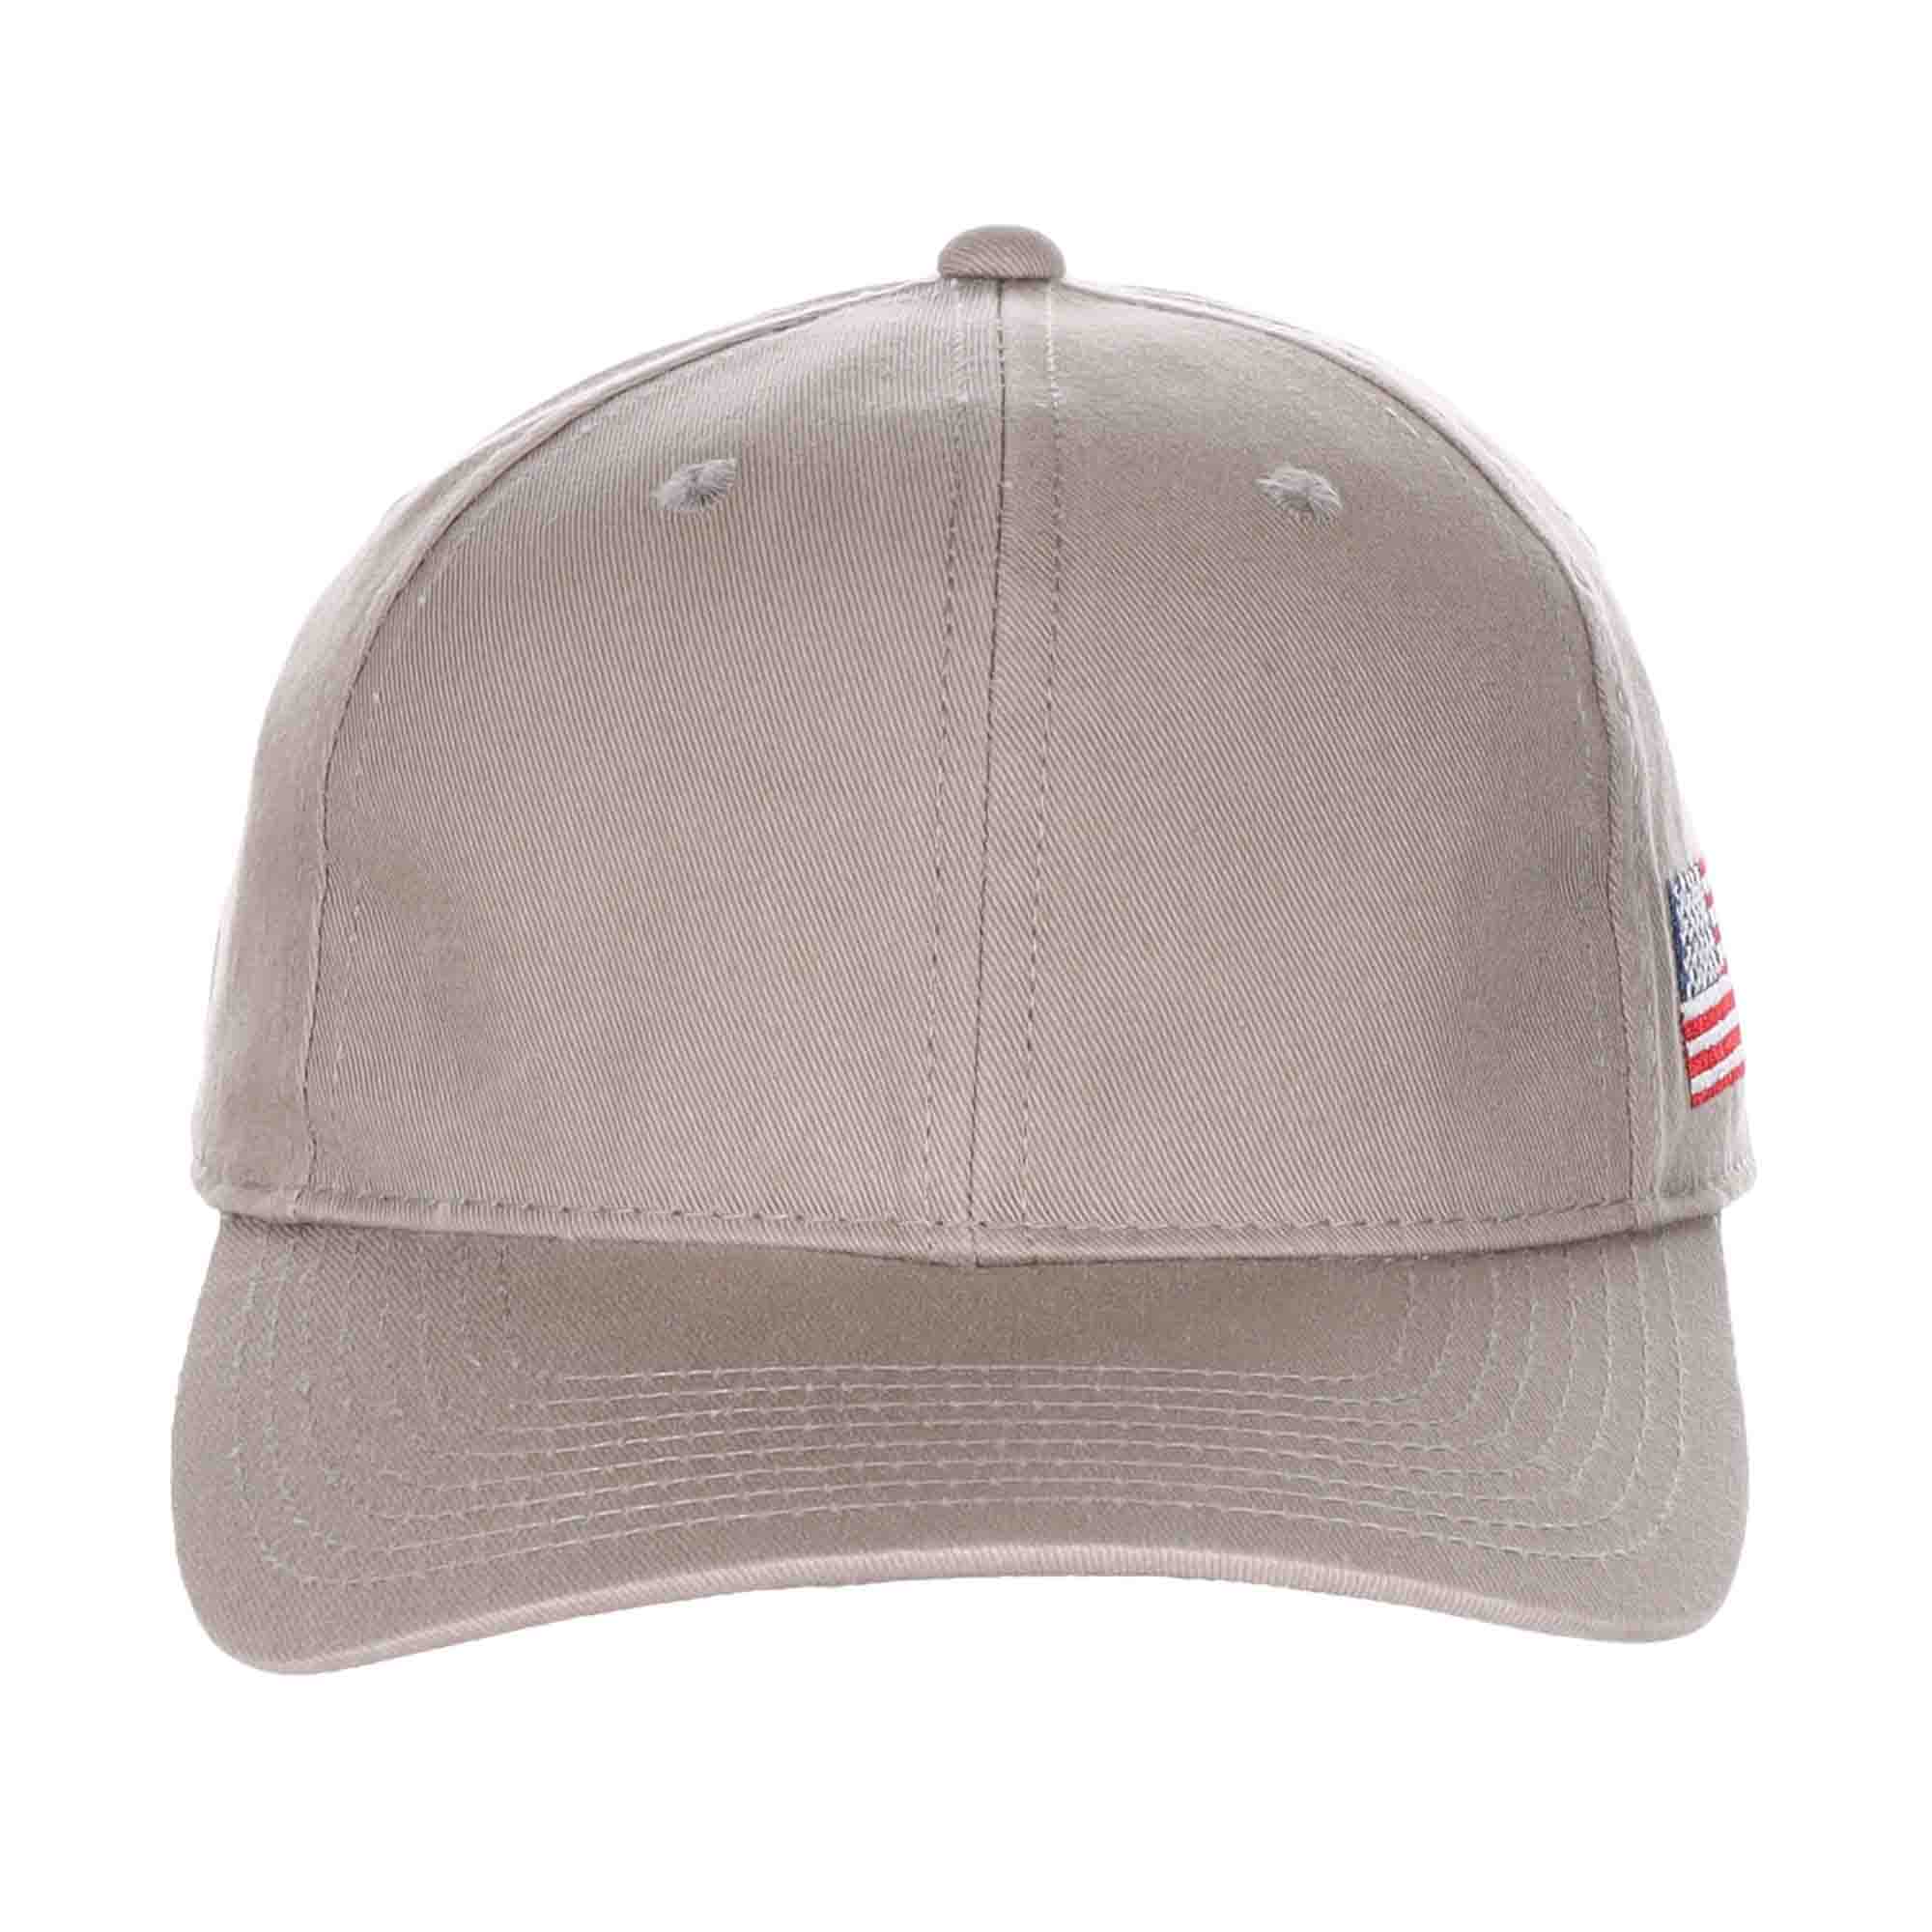 Washed Distressed Hats for Men Women Teens USA Flag Hat American Flag  Baseball Cap USA Adjustable Classic Dad Hat